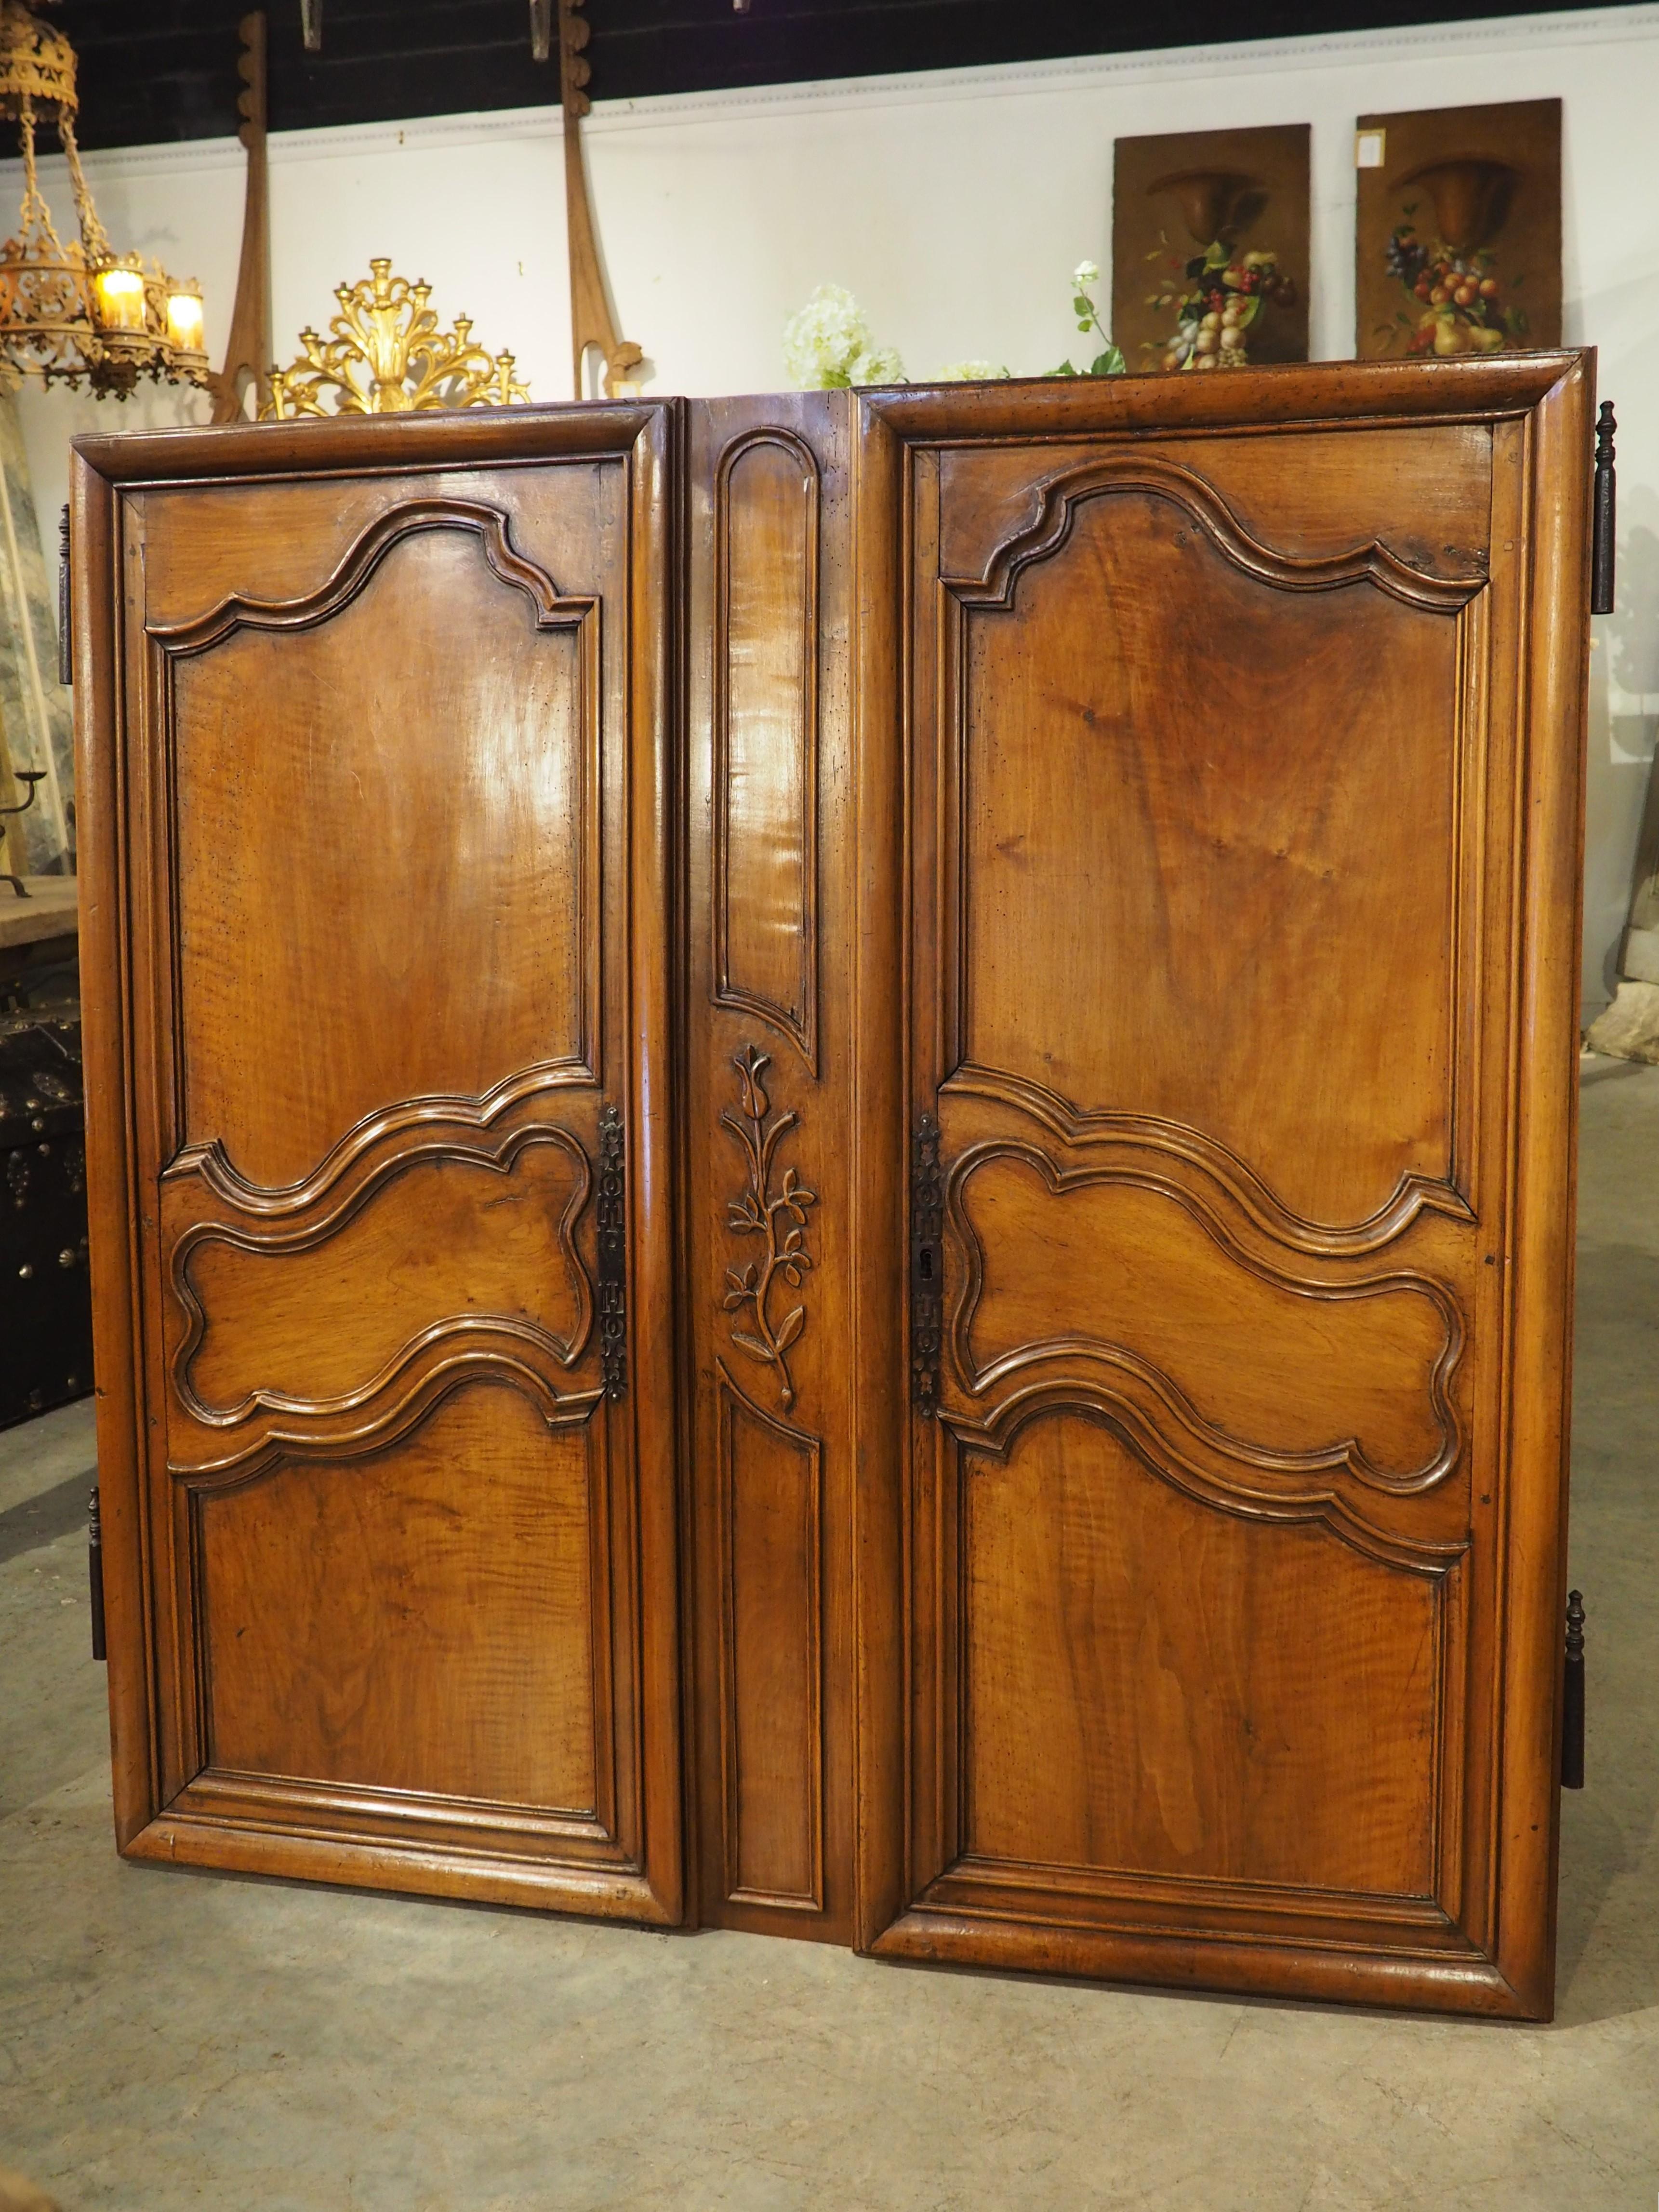 French Pair of Circa 1750 Solid Walnut Façade or Cabinet Doors from Provence, France For Sale